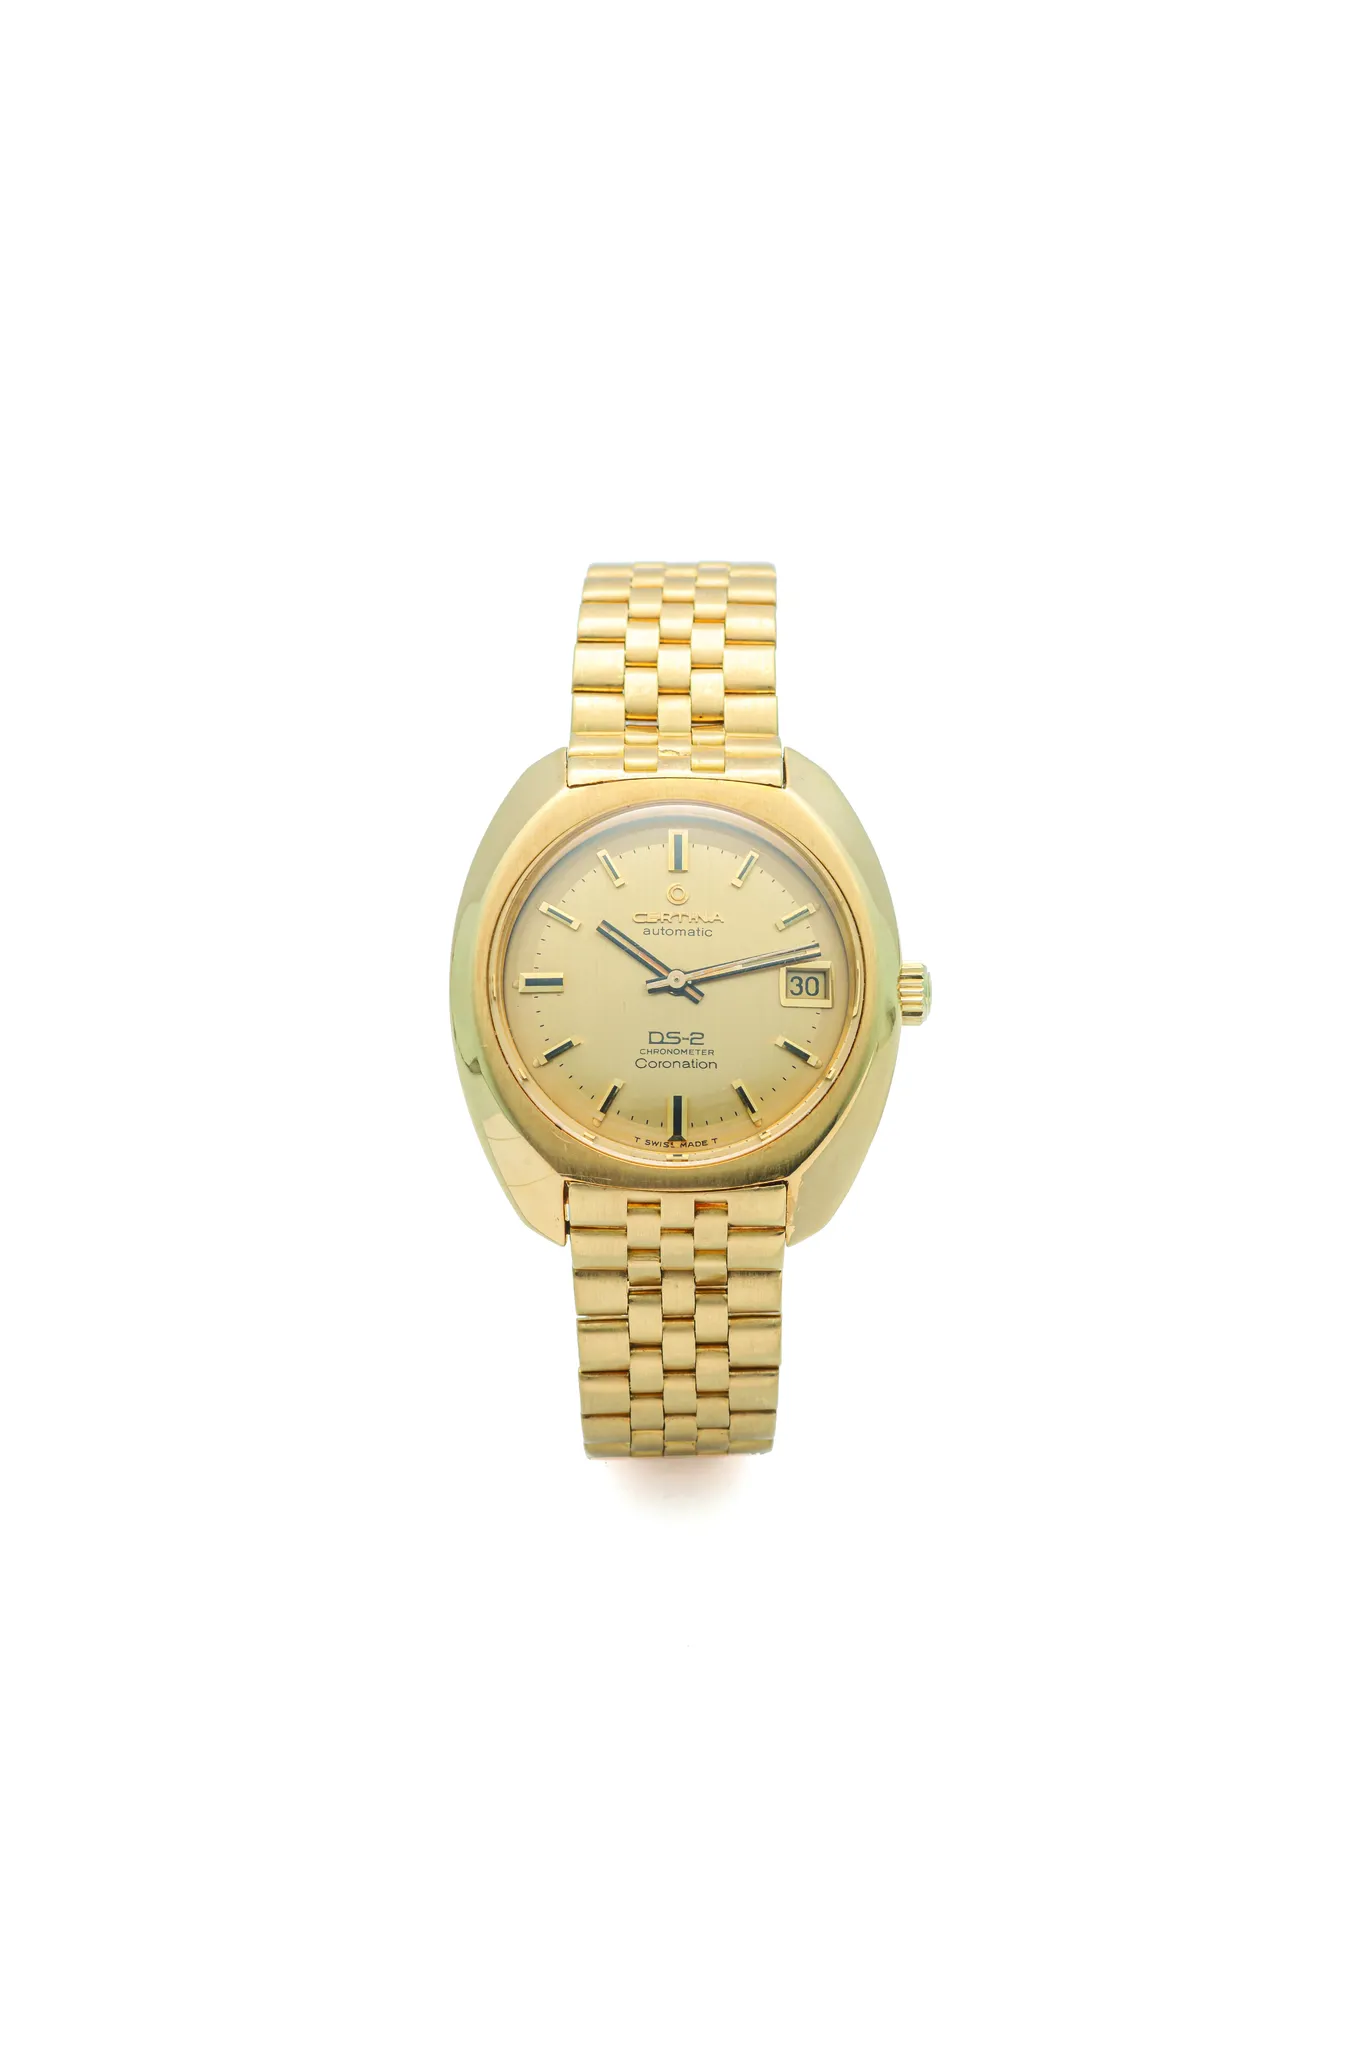 Certina DS-2 346.825 / 5810 300 43mm Yellow gold Champagne